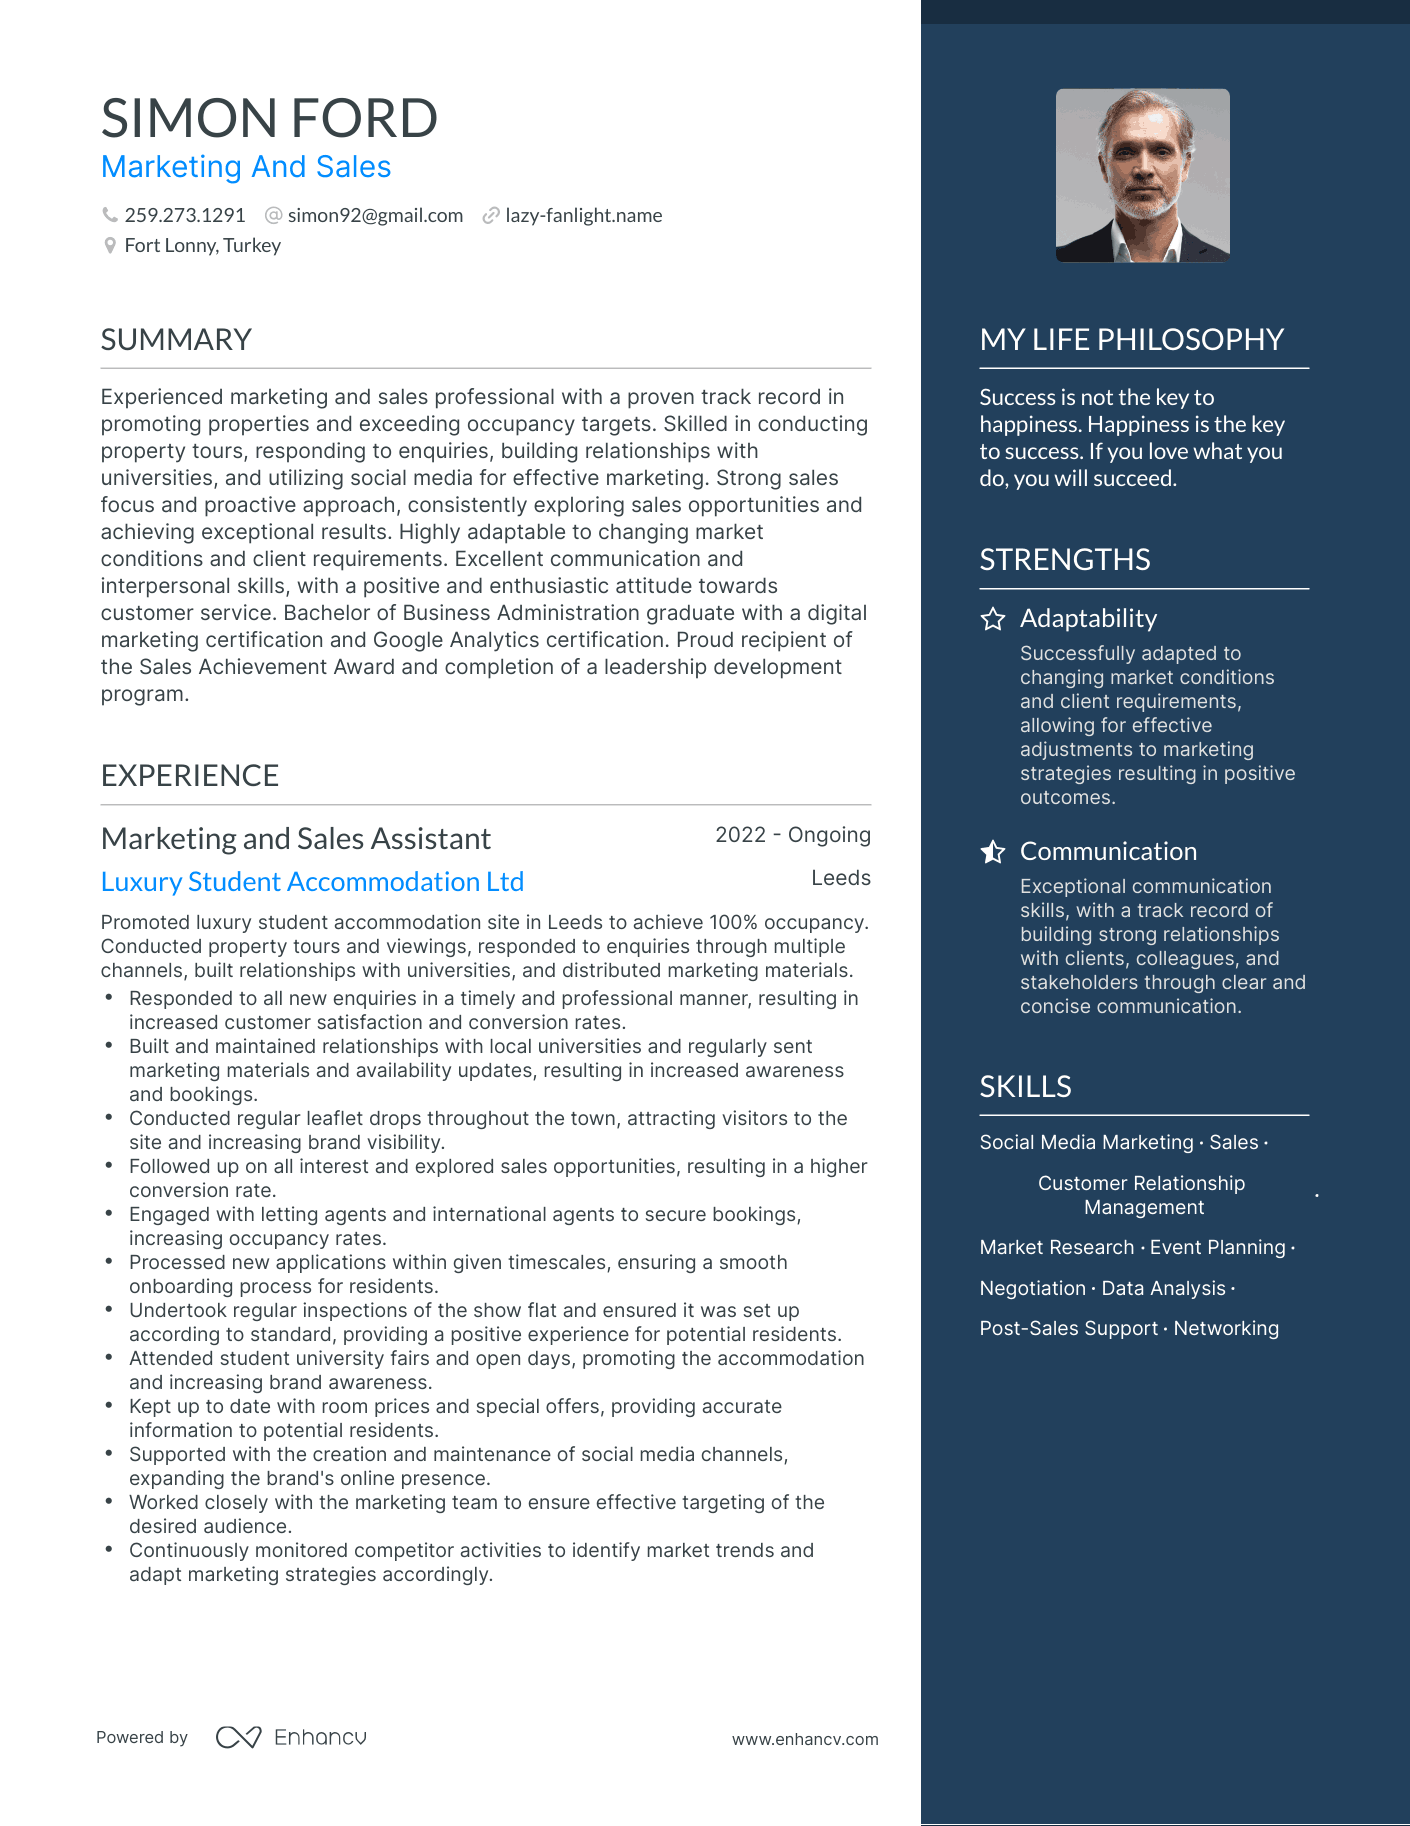 Marketing And Sales resume example